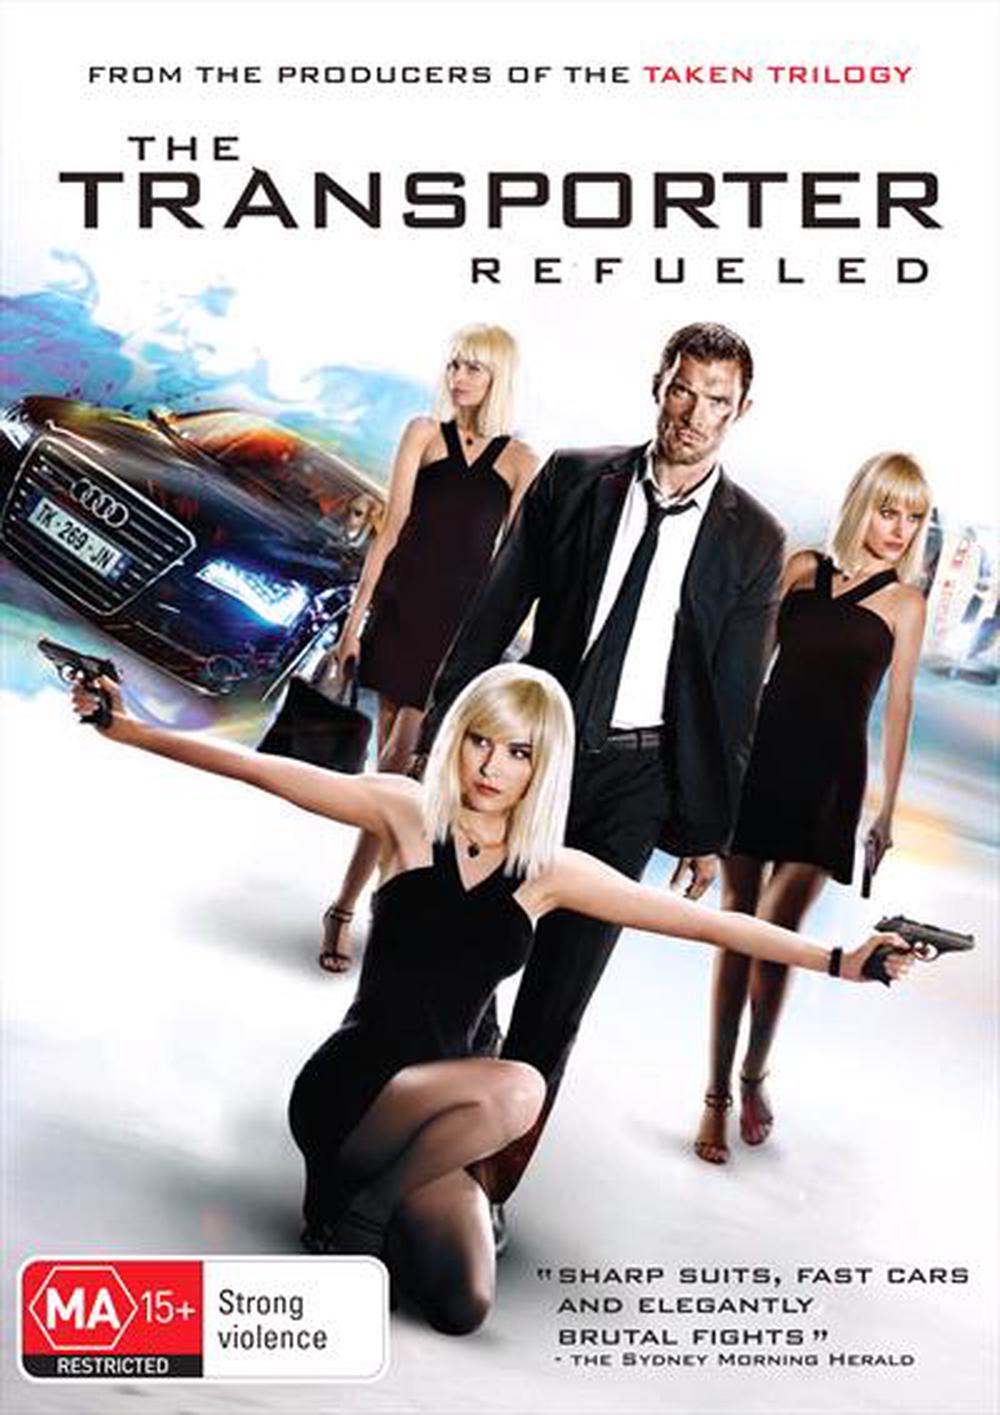 the transporter 4 refueled